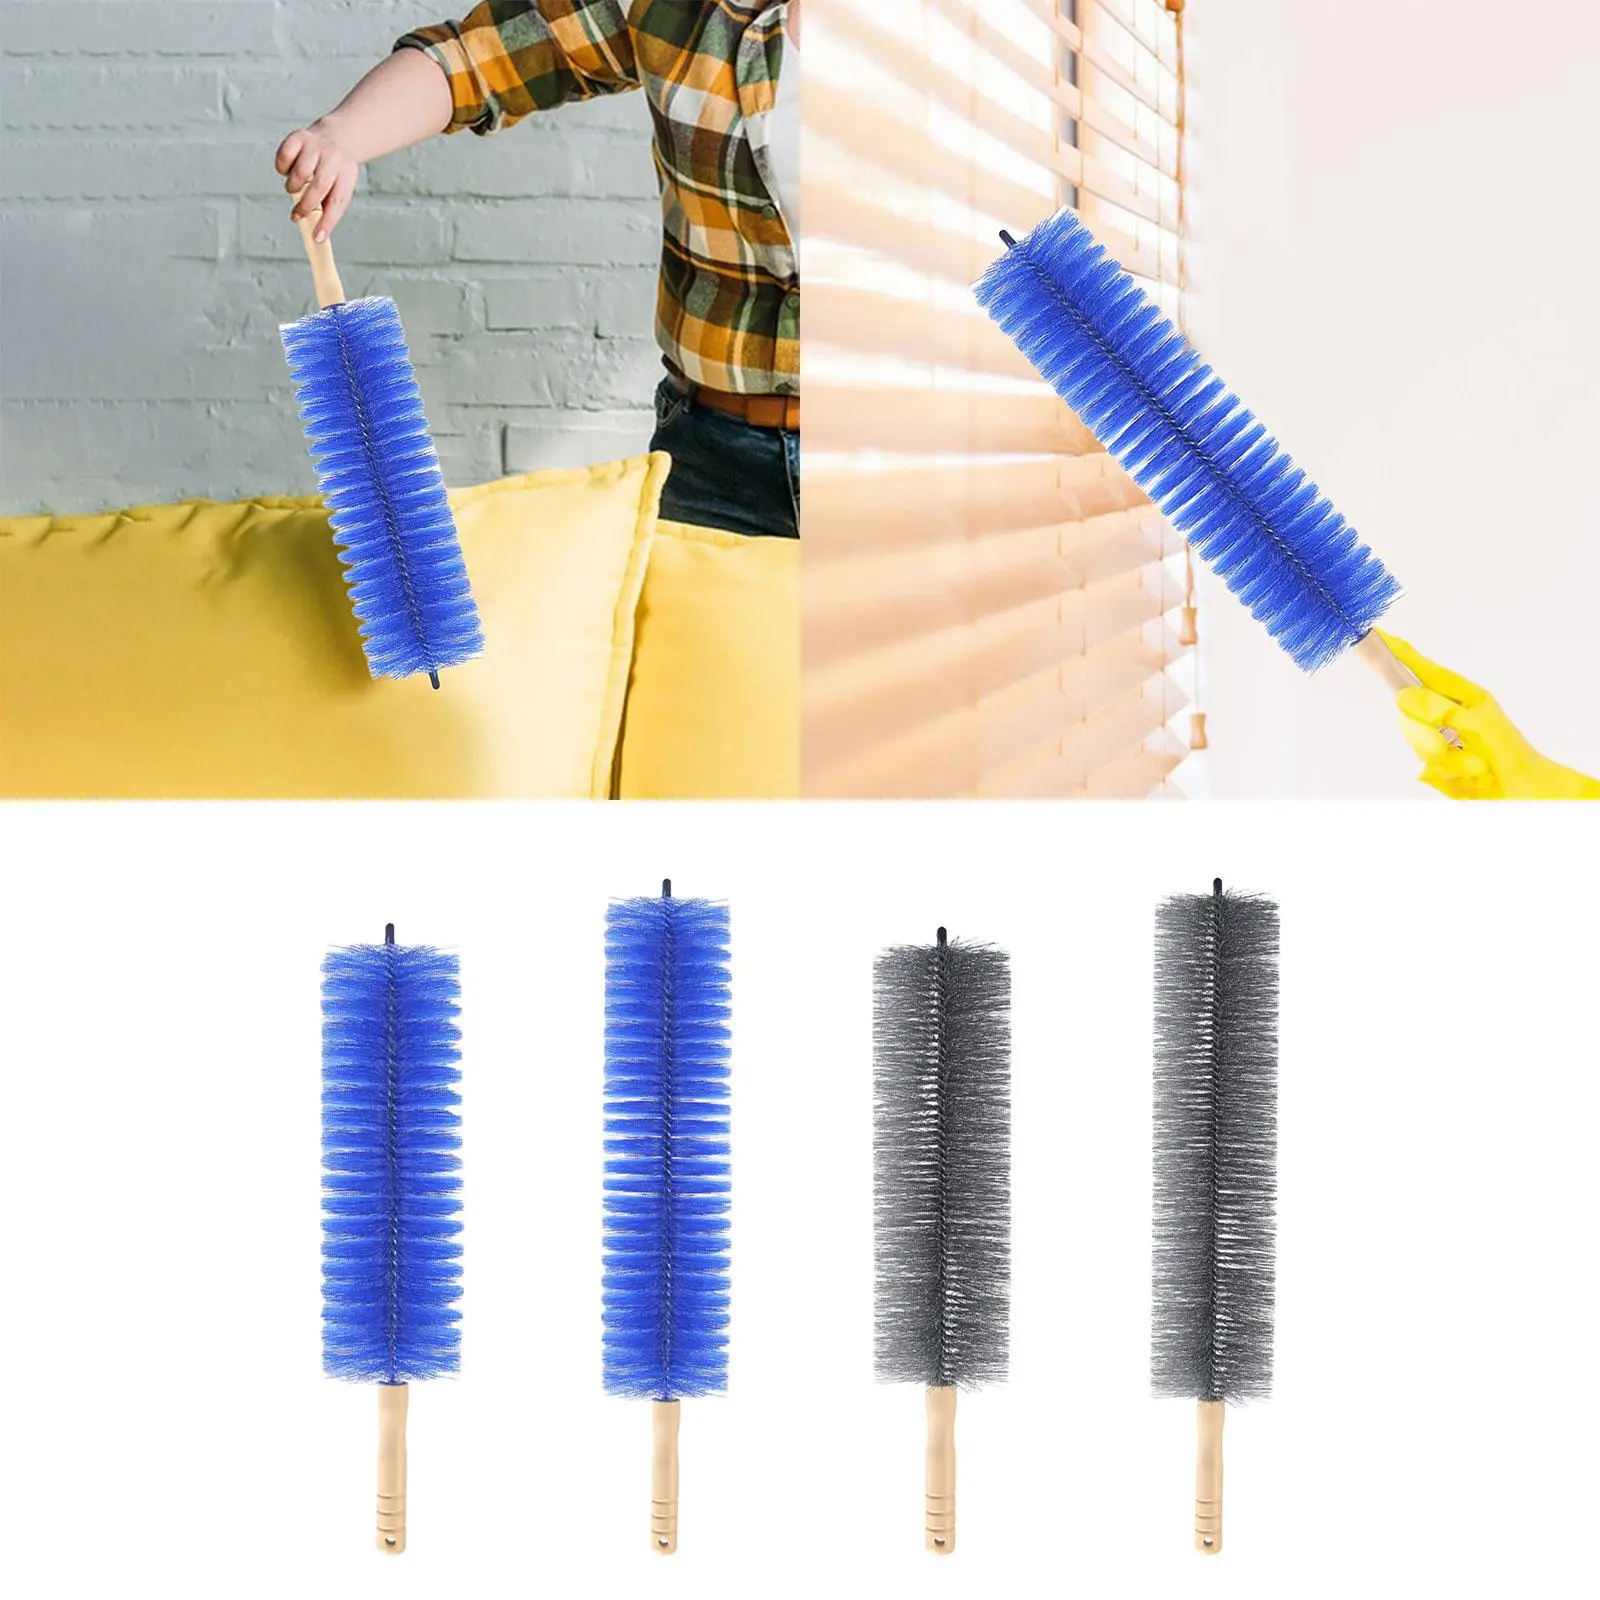 Dust Cleaning Brush Extendable Dust Remover for Ceiling Fan Window Car